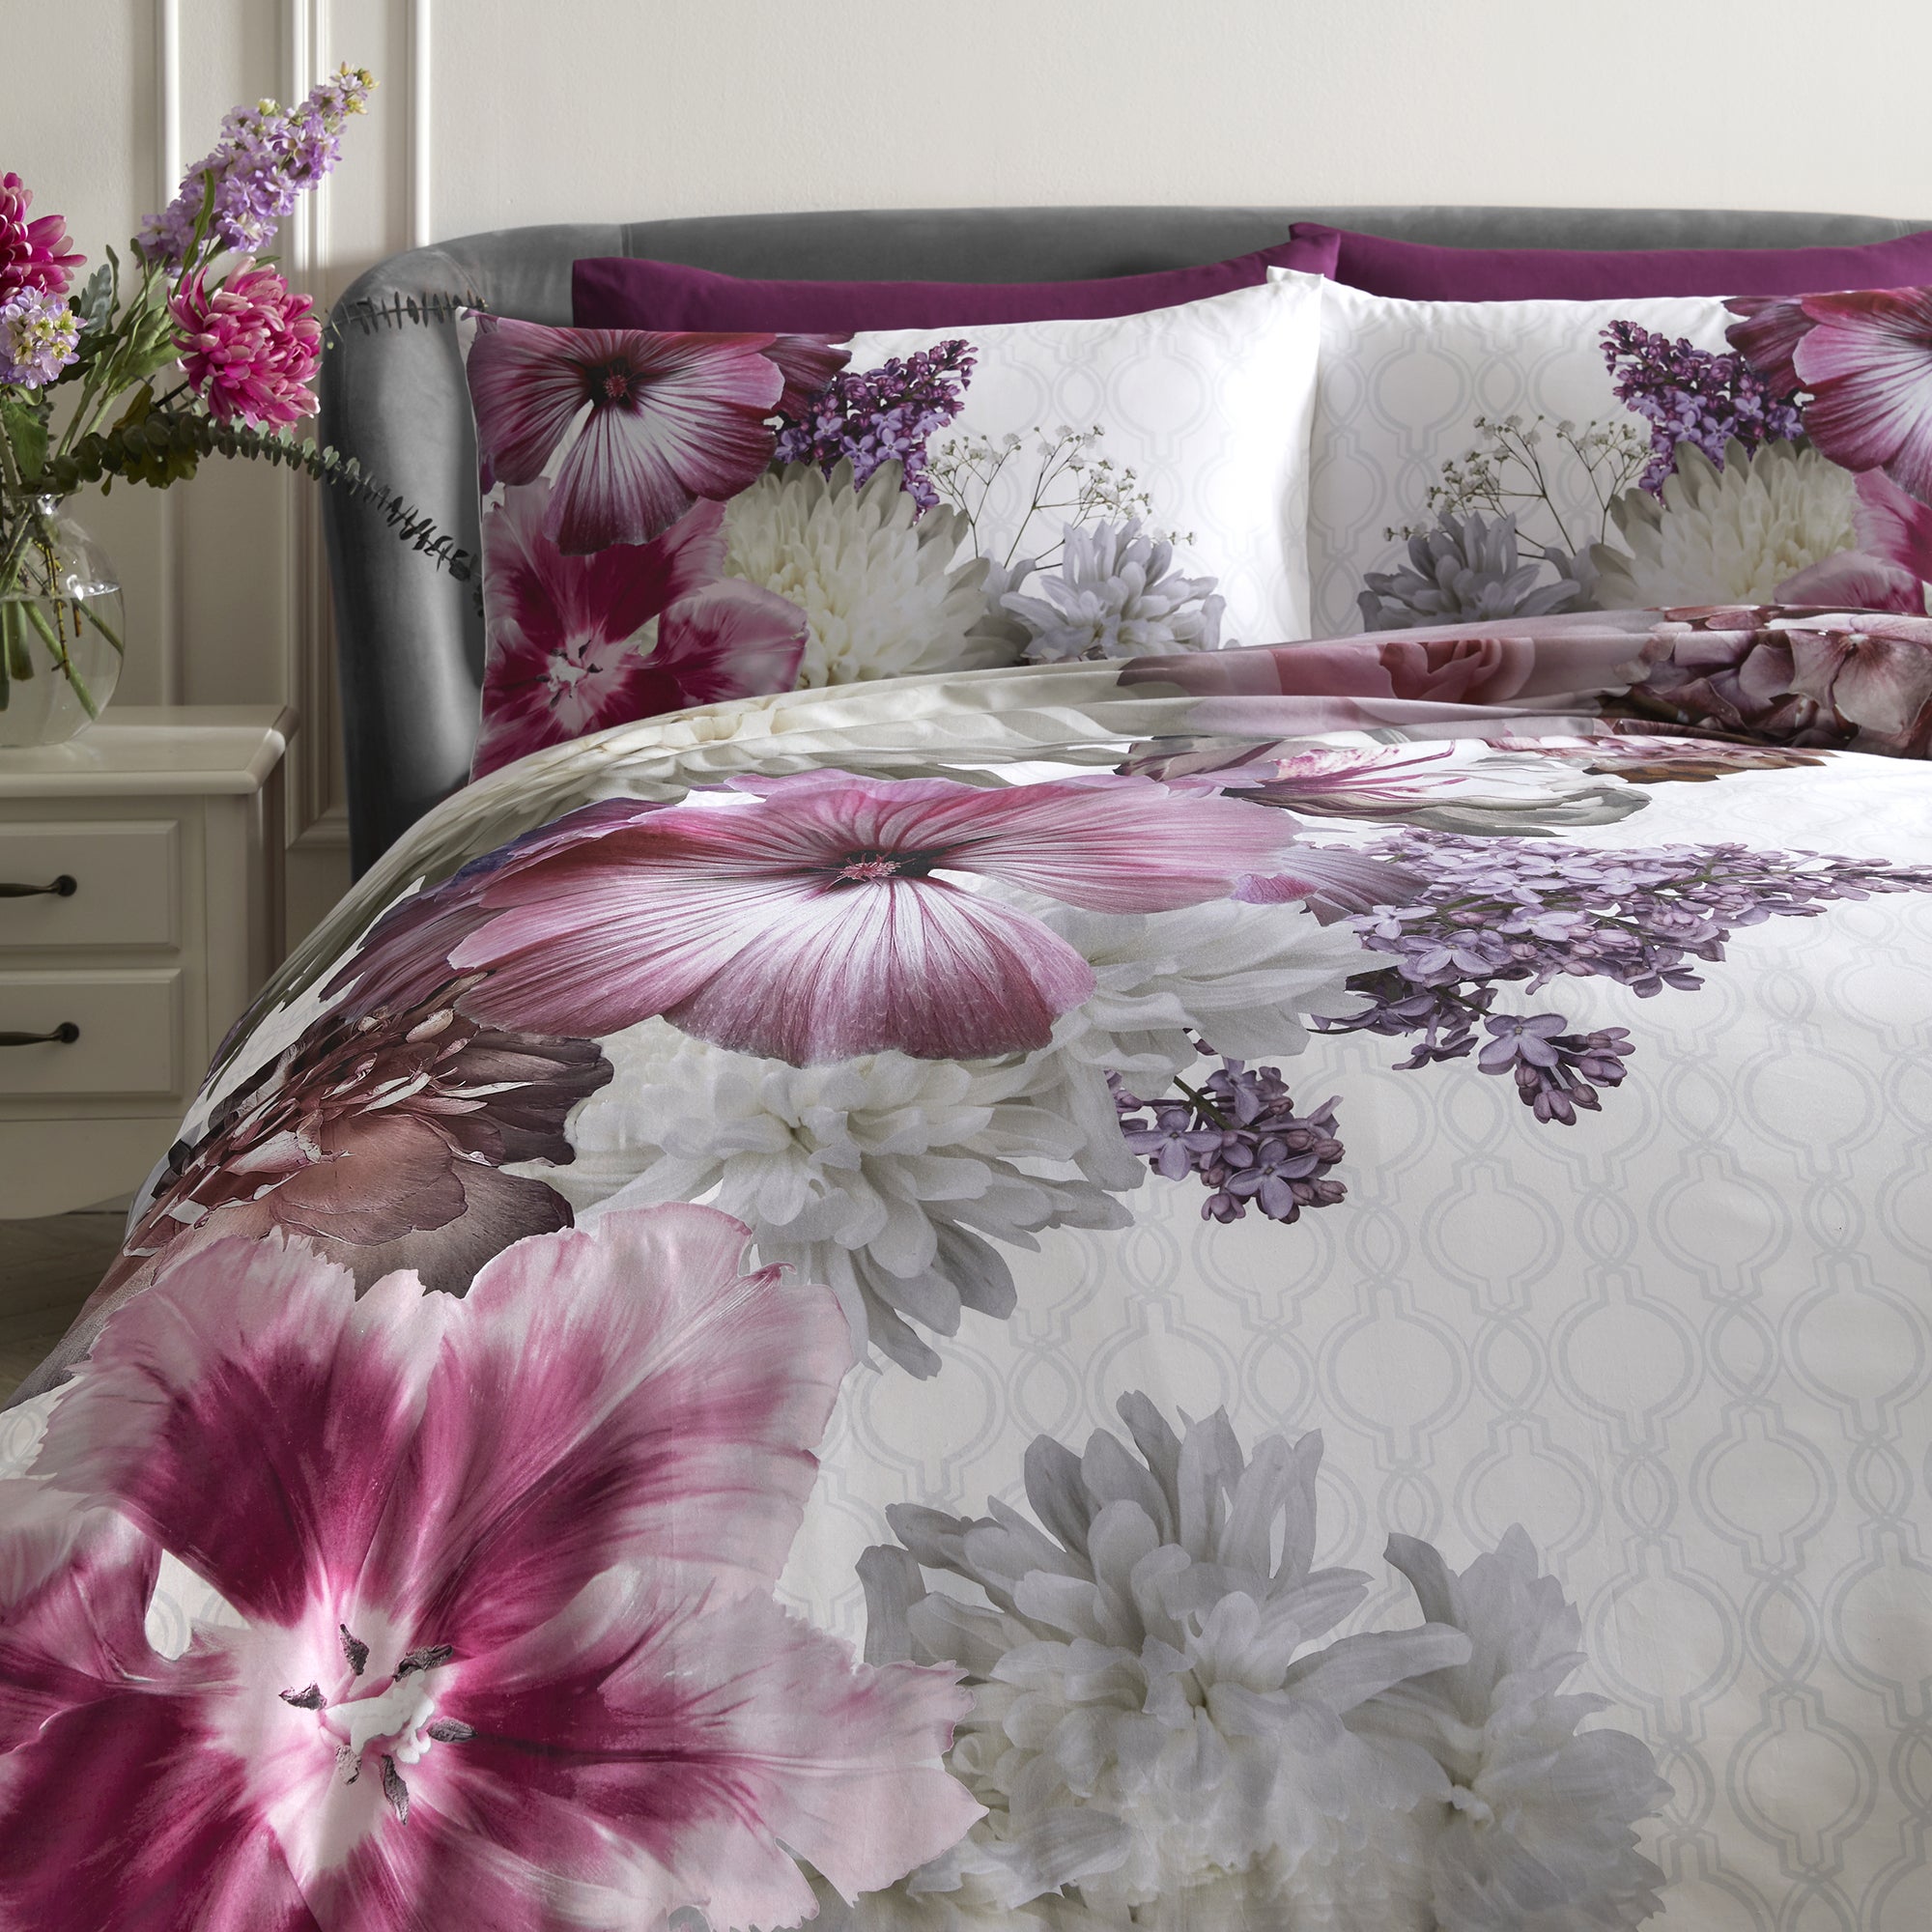 Laurence Llewelyn Bowen Mayfair Lady 100 Cotton Duvet Cover And Pillowcase Set Pink Purple And White